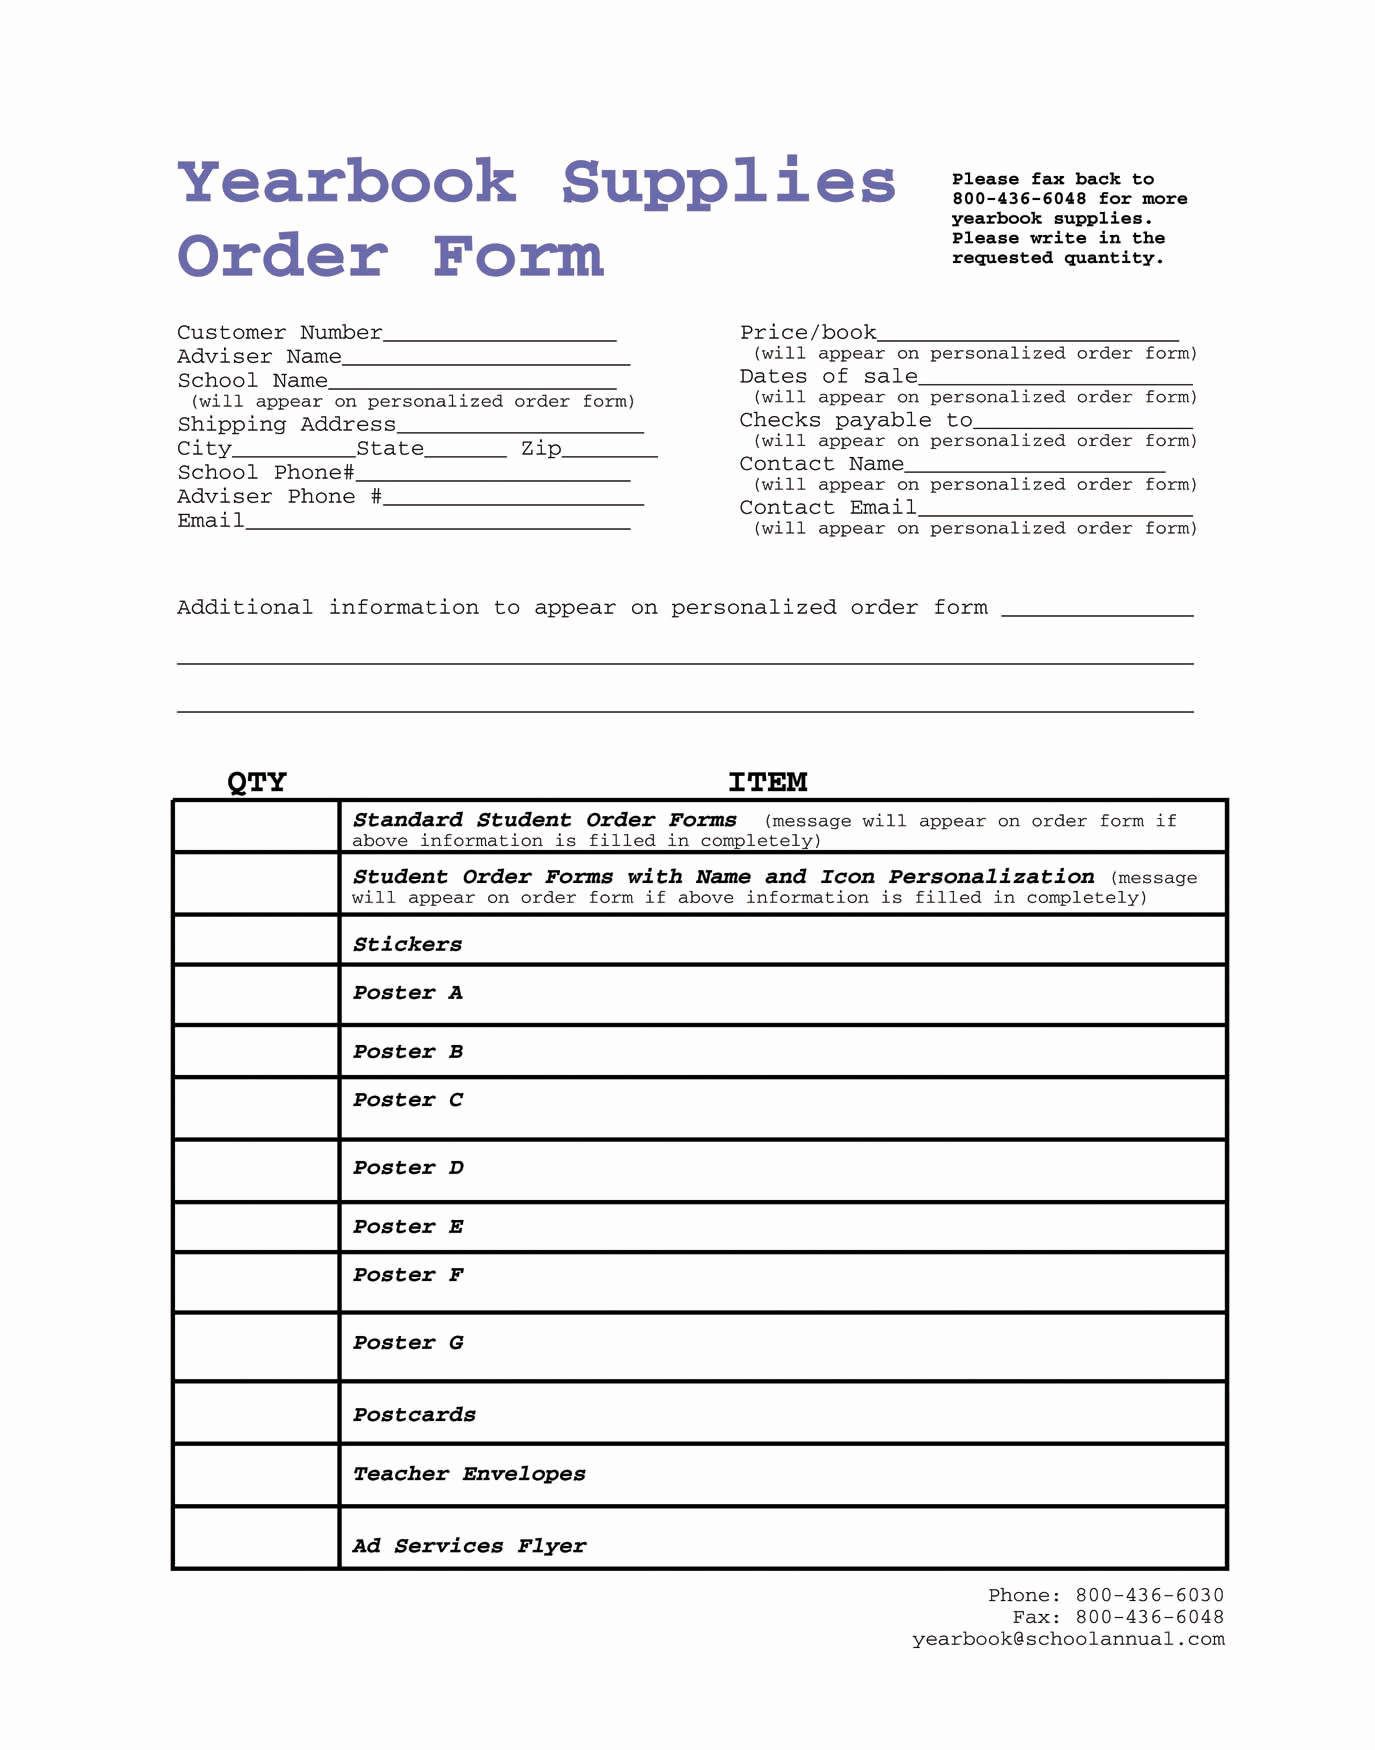 Supply order forms New Yearbook Supplies order form – School Annual by Jostens